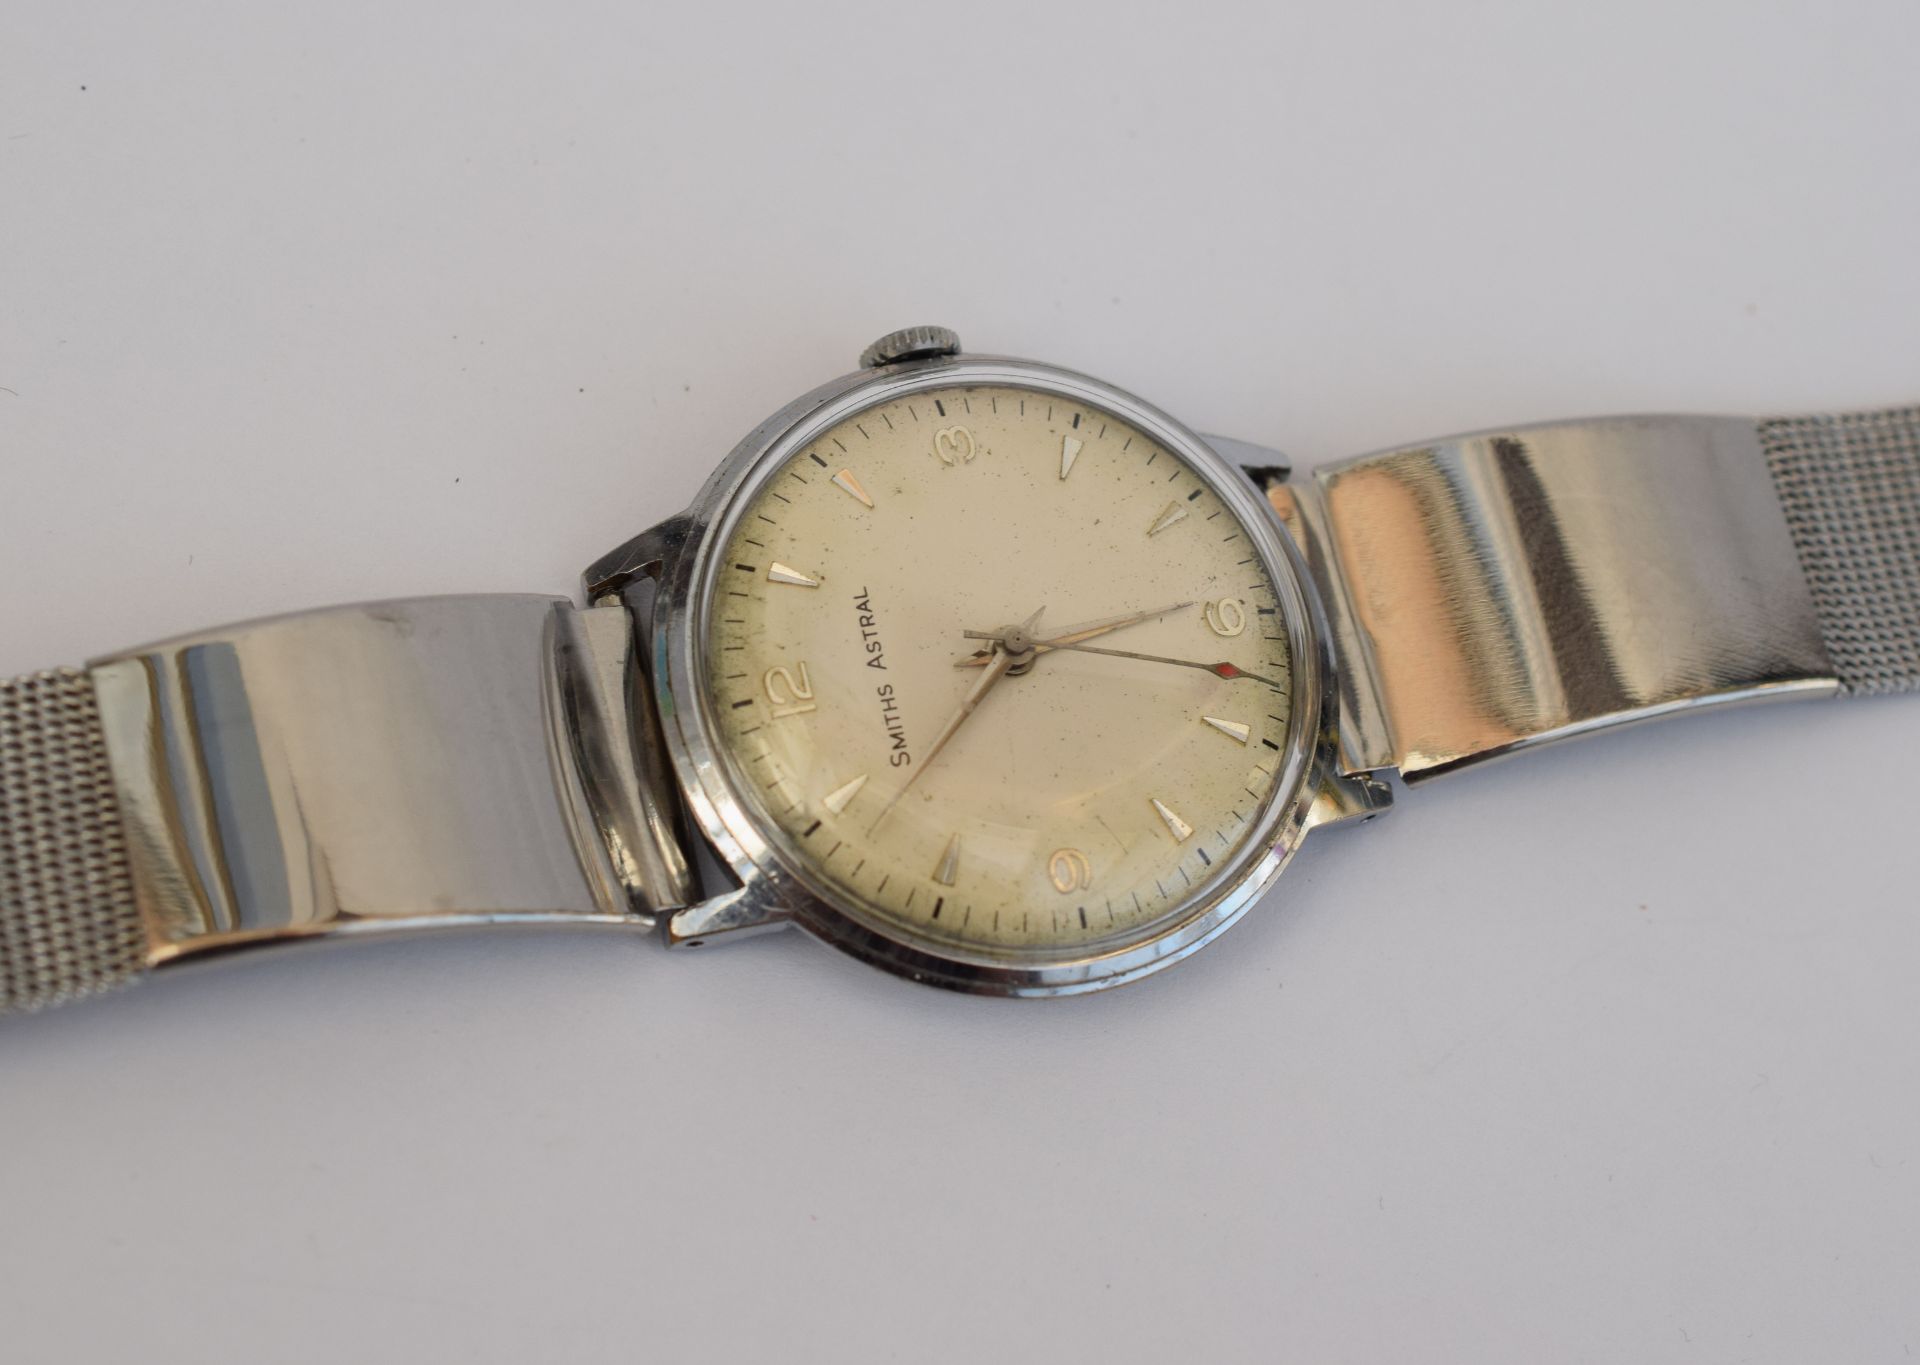 Smiths Astral Gentleman's Wristwatch - Image 8 of 9